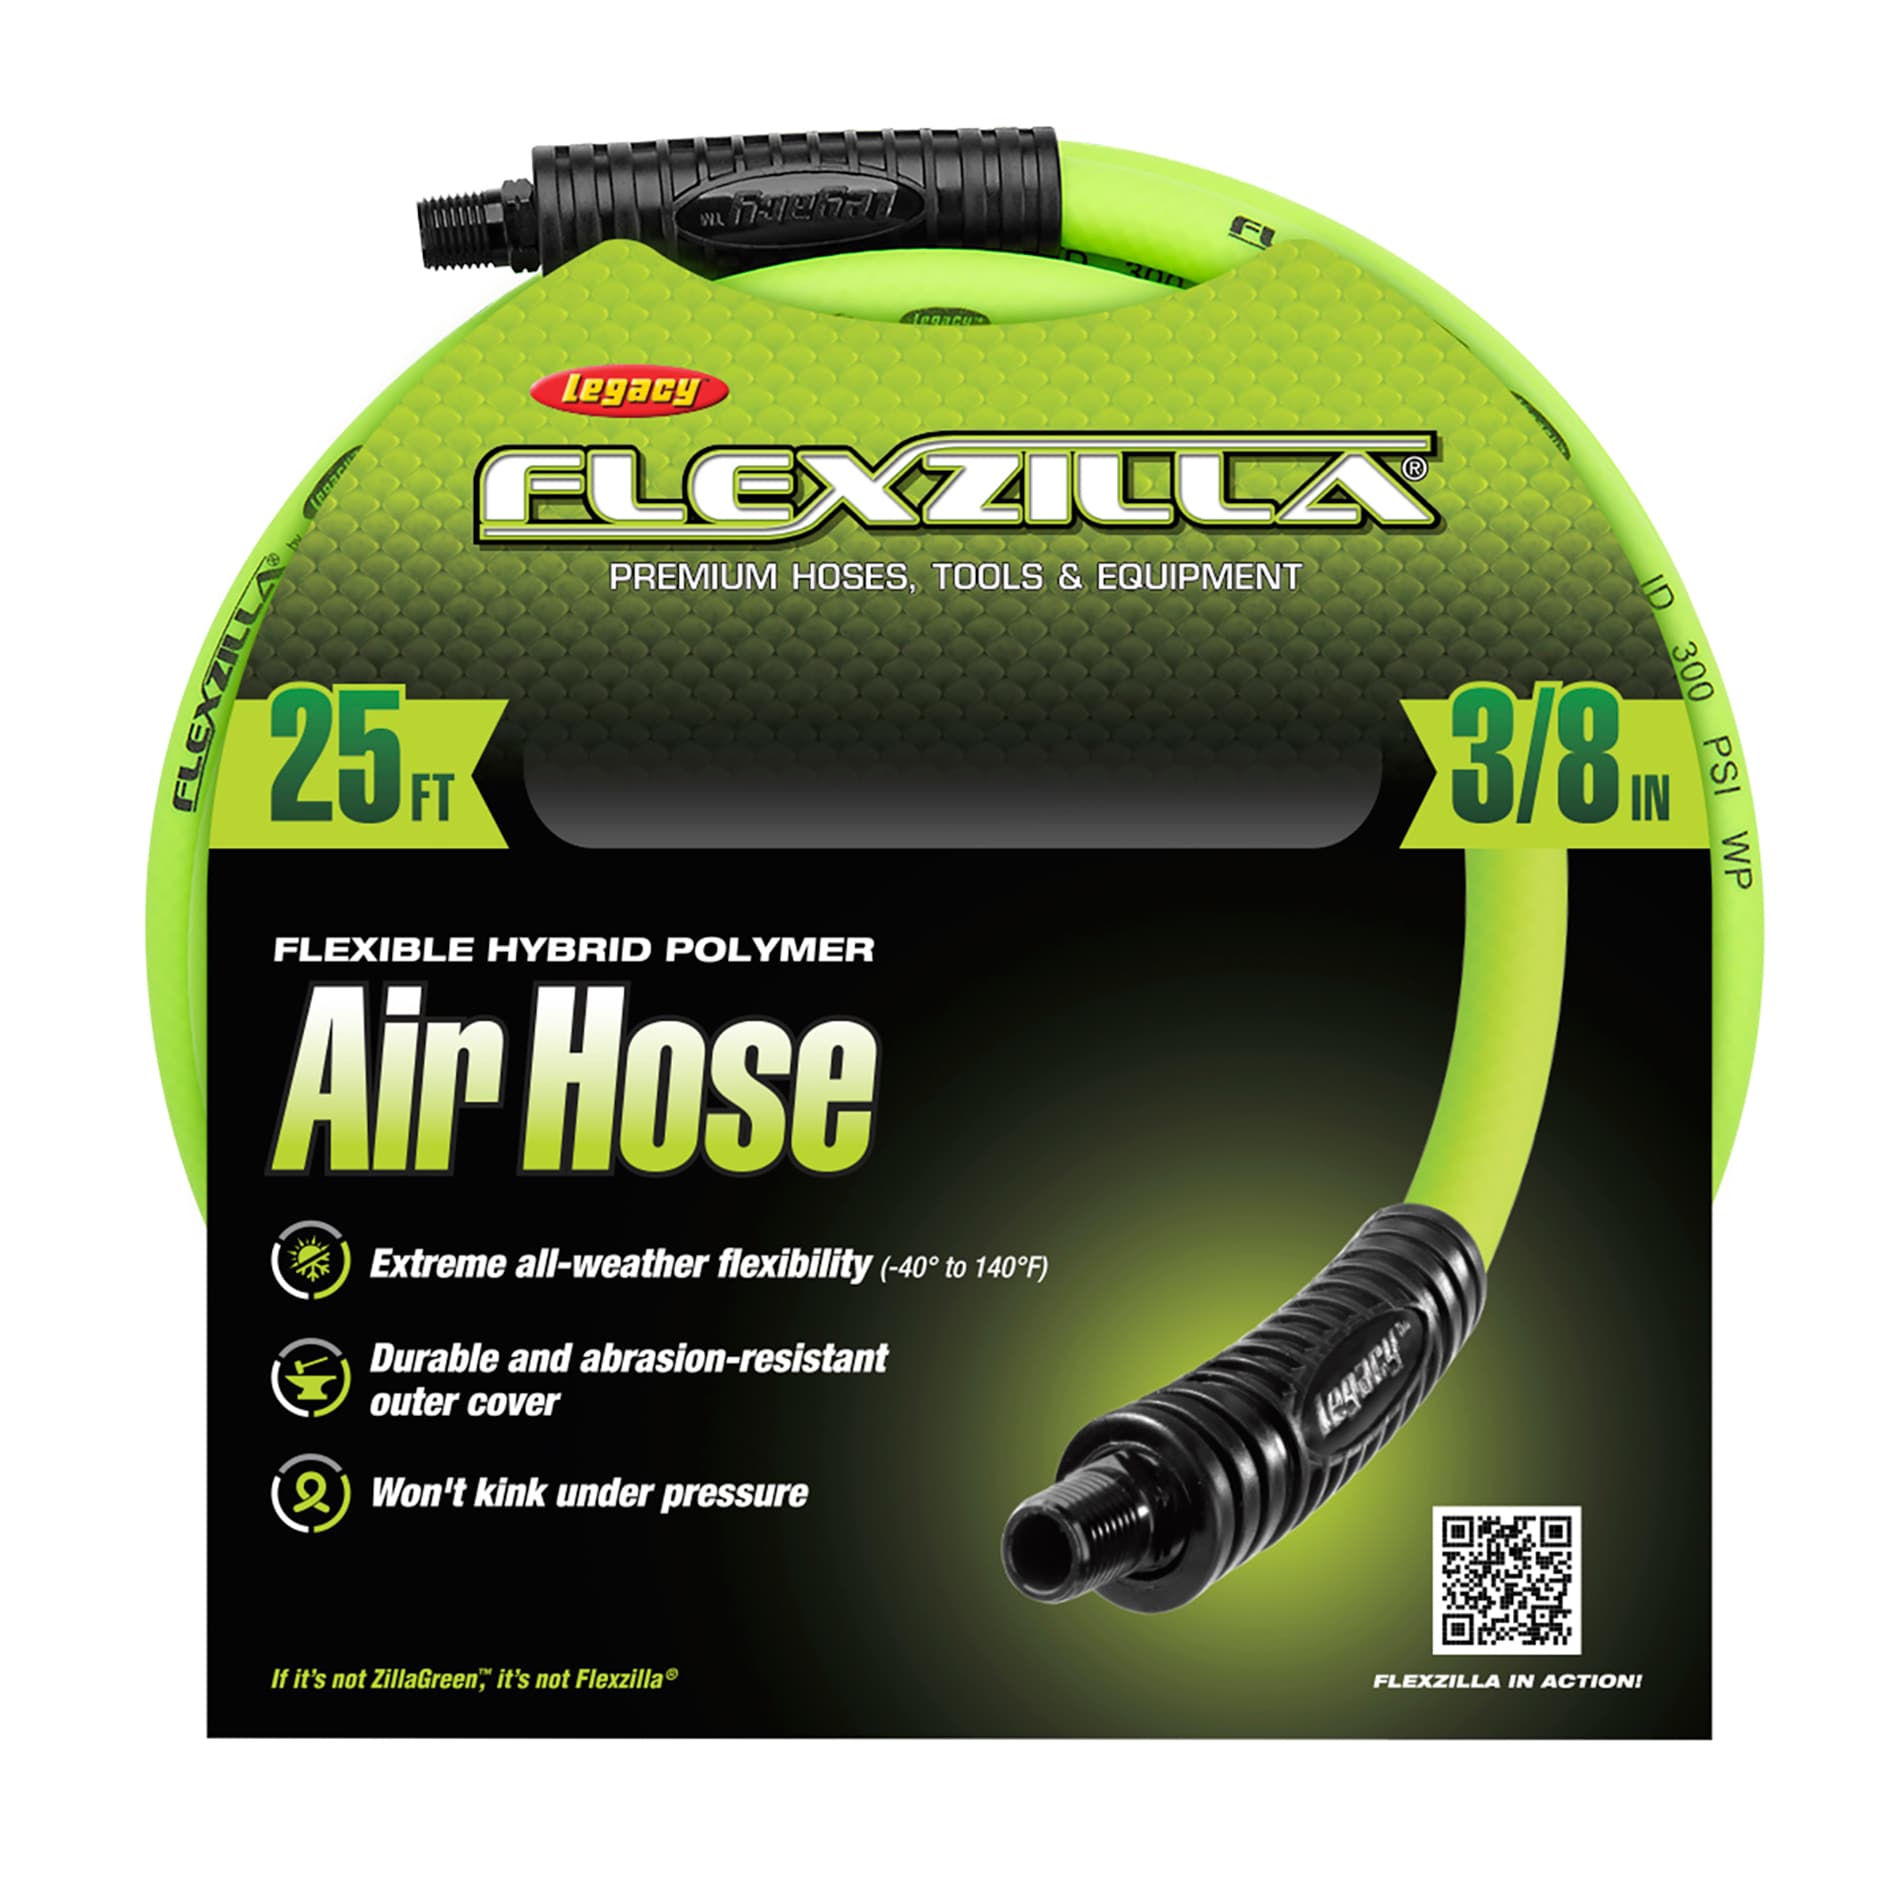 Flexzilla Air Hose, 3/8-in x 25-ft, 1/4-in Mnpt Fittings in the 